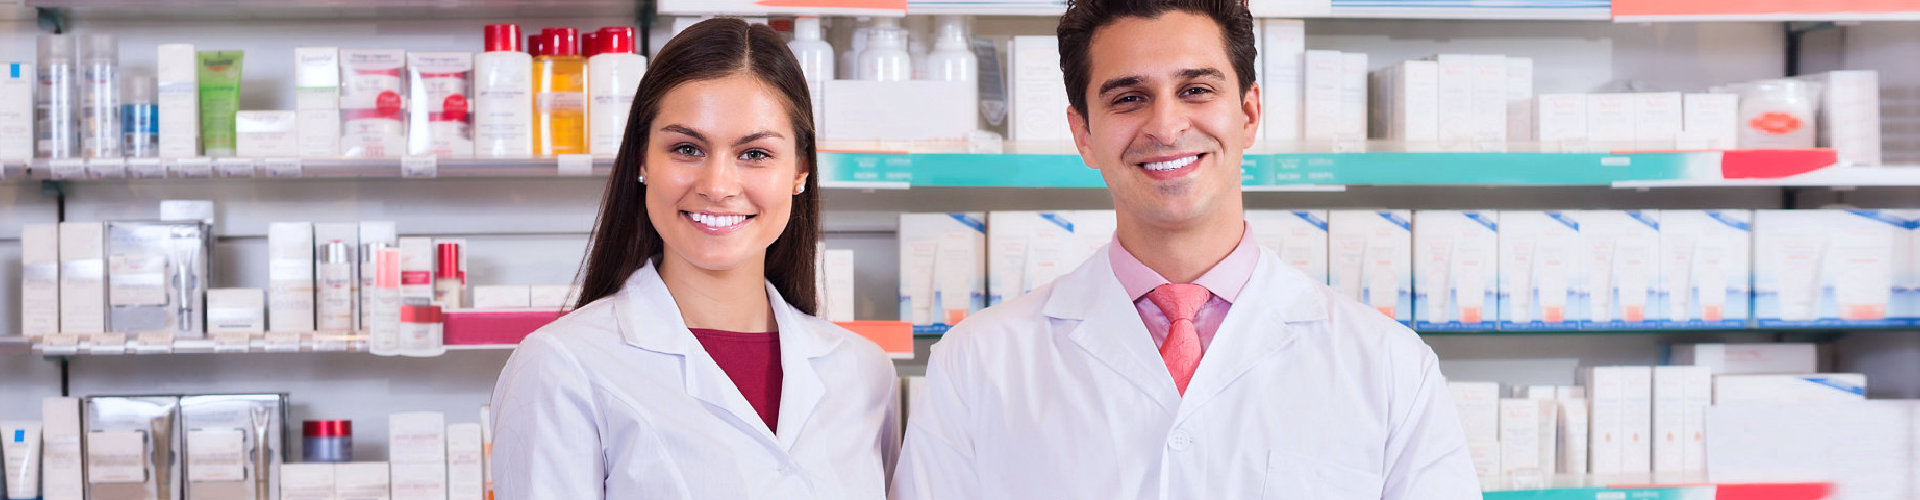 female and male pharmacists smiling